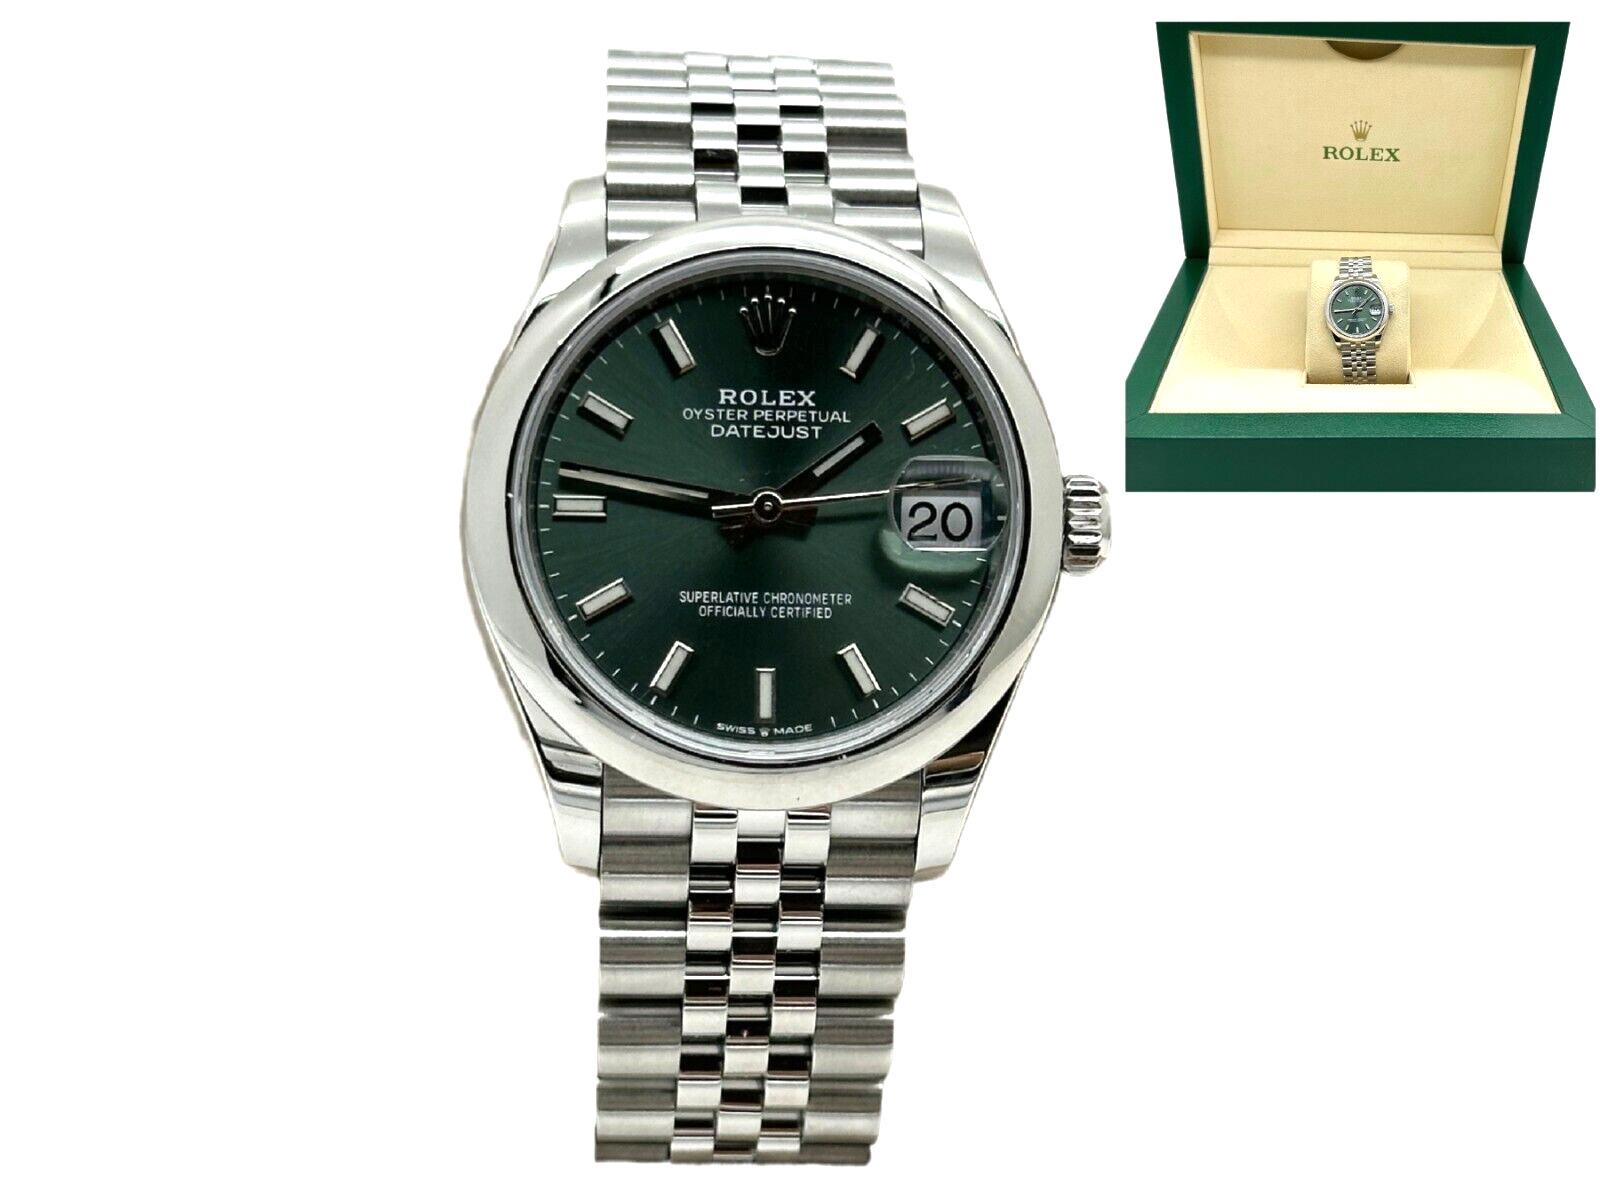 Style Number: 278240 

Serial: H68Q5***

Year: 2020 - Now

Model: Midsize Datejust 

Case Material: Stainless Steel 

Band: Stainless Steel 

Bezel: Stainless Steel Smooth Bezel 

Dial: Green 

Face: Sapphire Crystal 

Case Size: 31mm 

Includes: